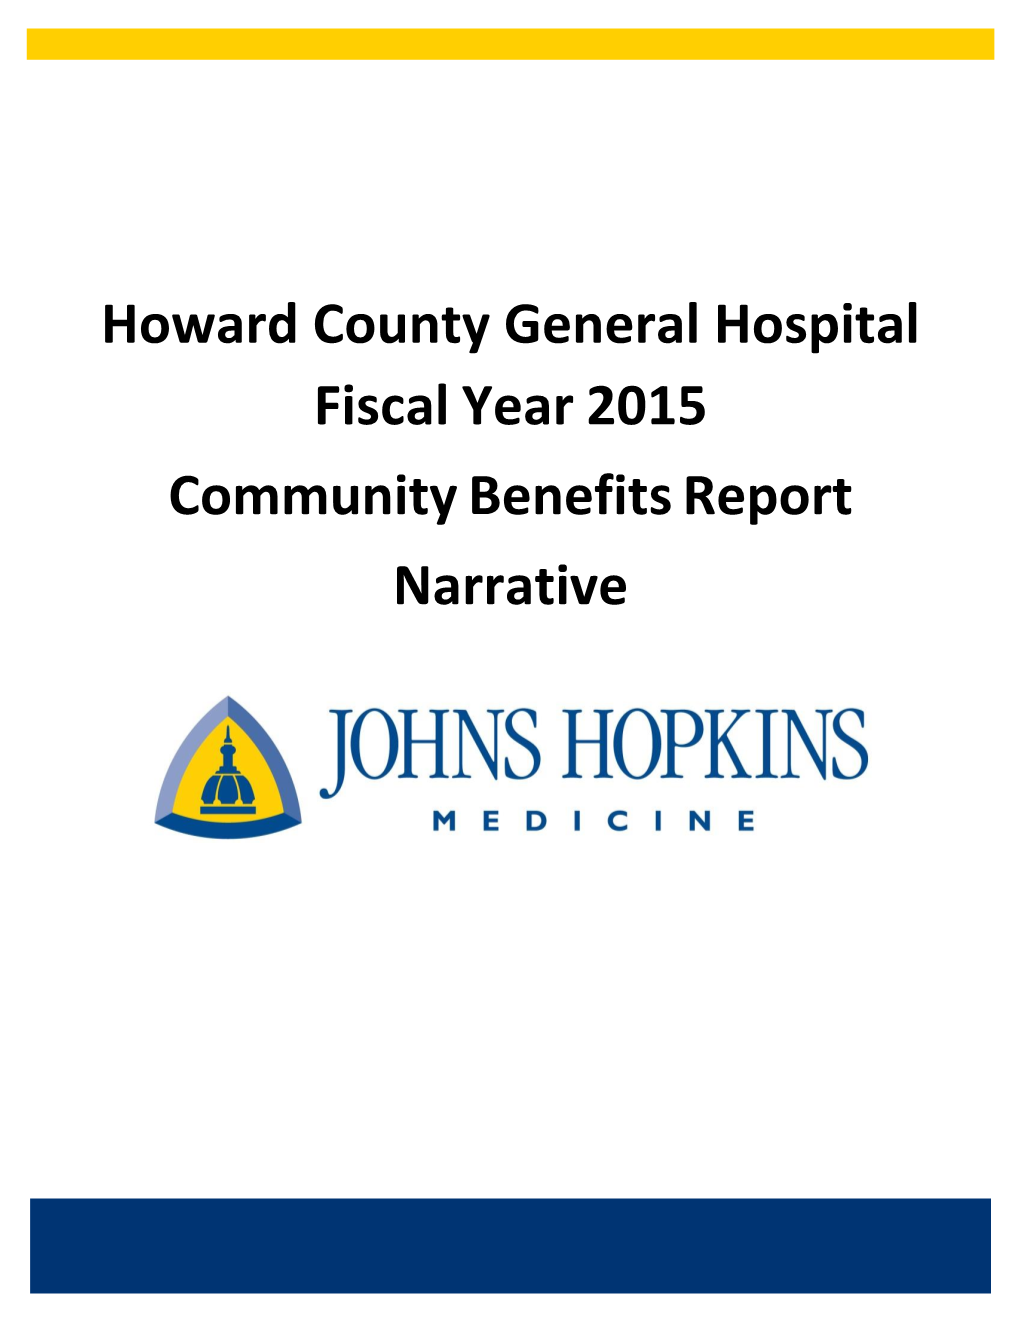 Howard County General Hospital Fiscal Year 2015 Community Benefits Report Narrative